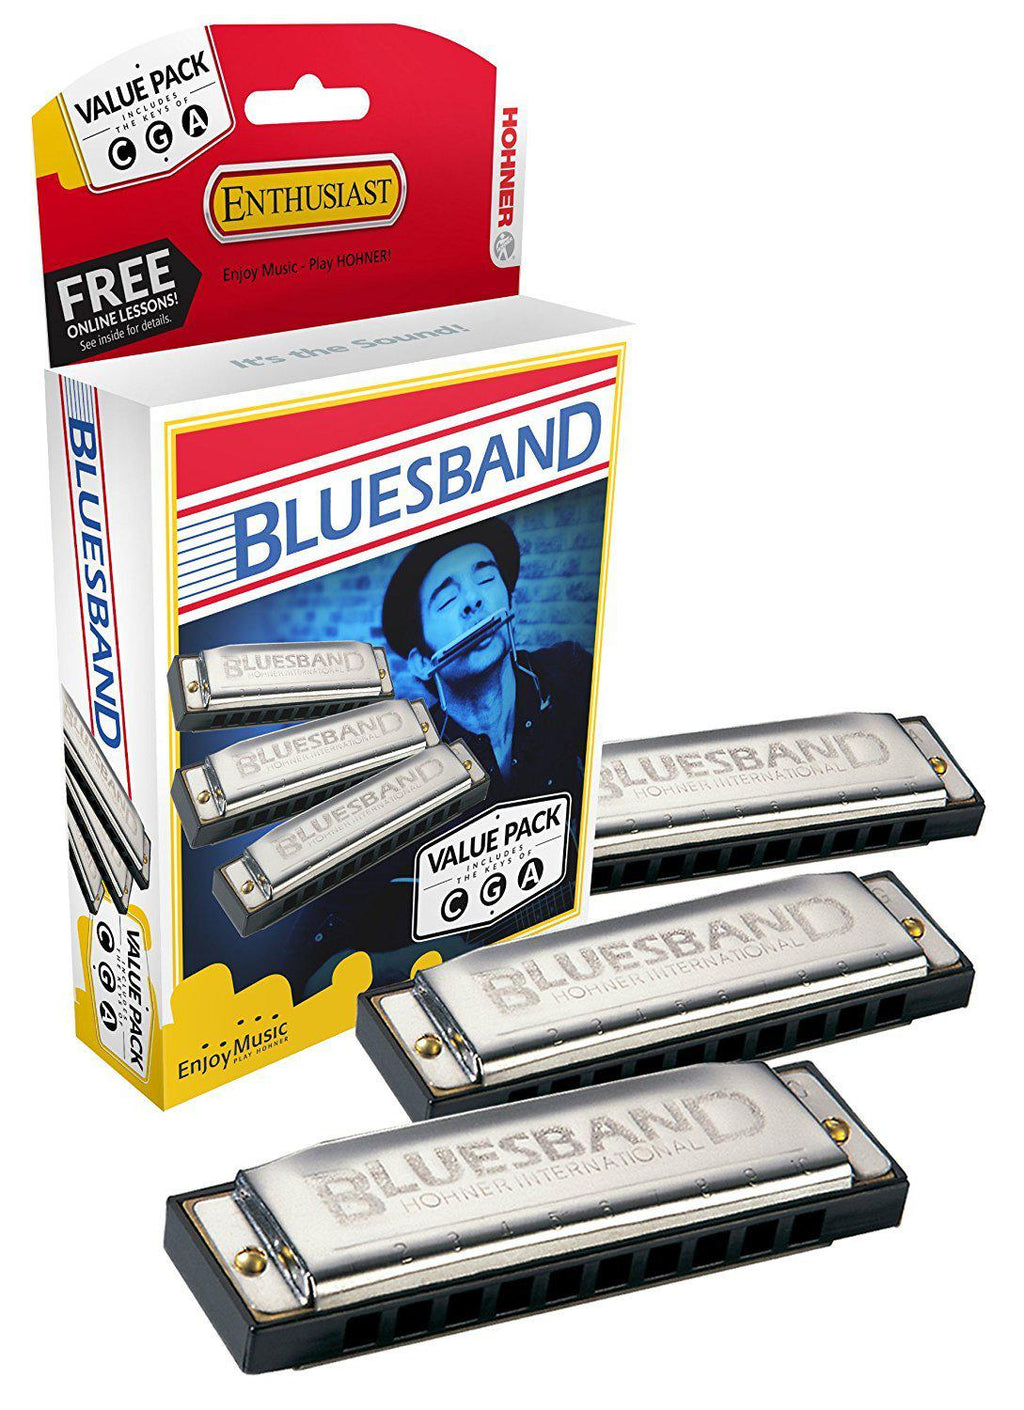 Hohner Bluesband Harmonica Pro Pack, Keys of C, G, and A Major